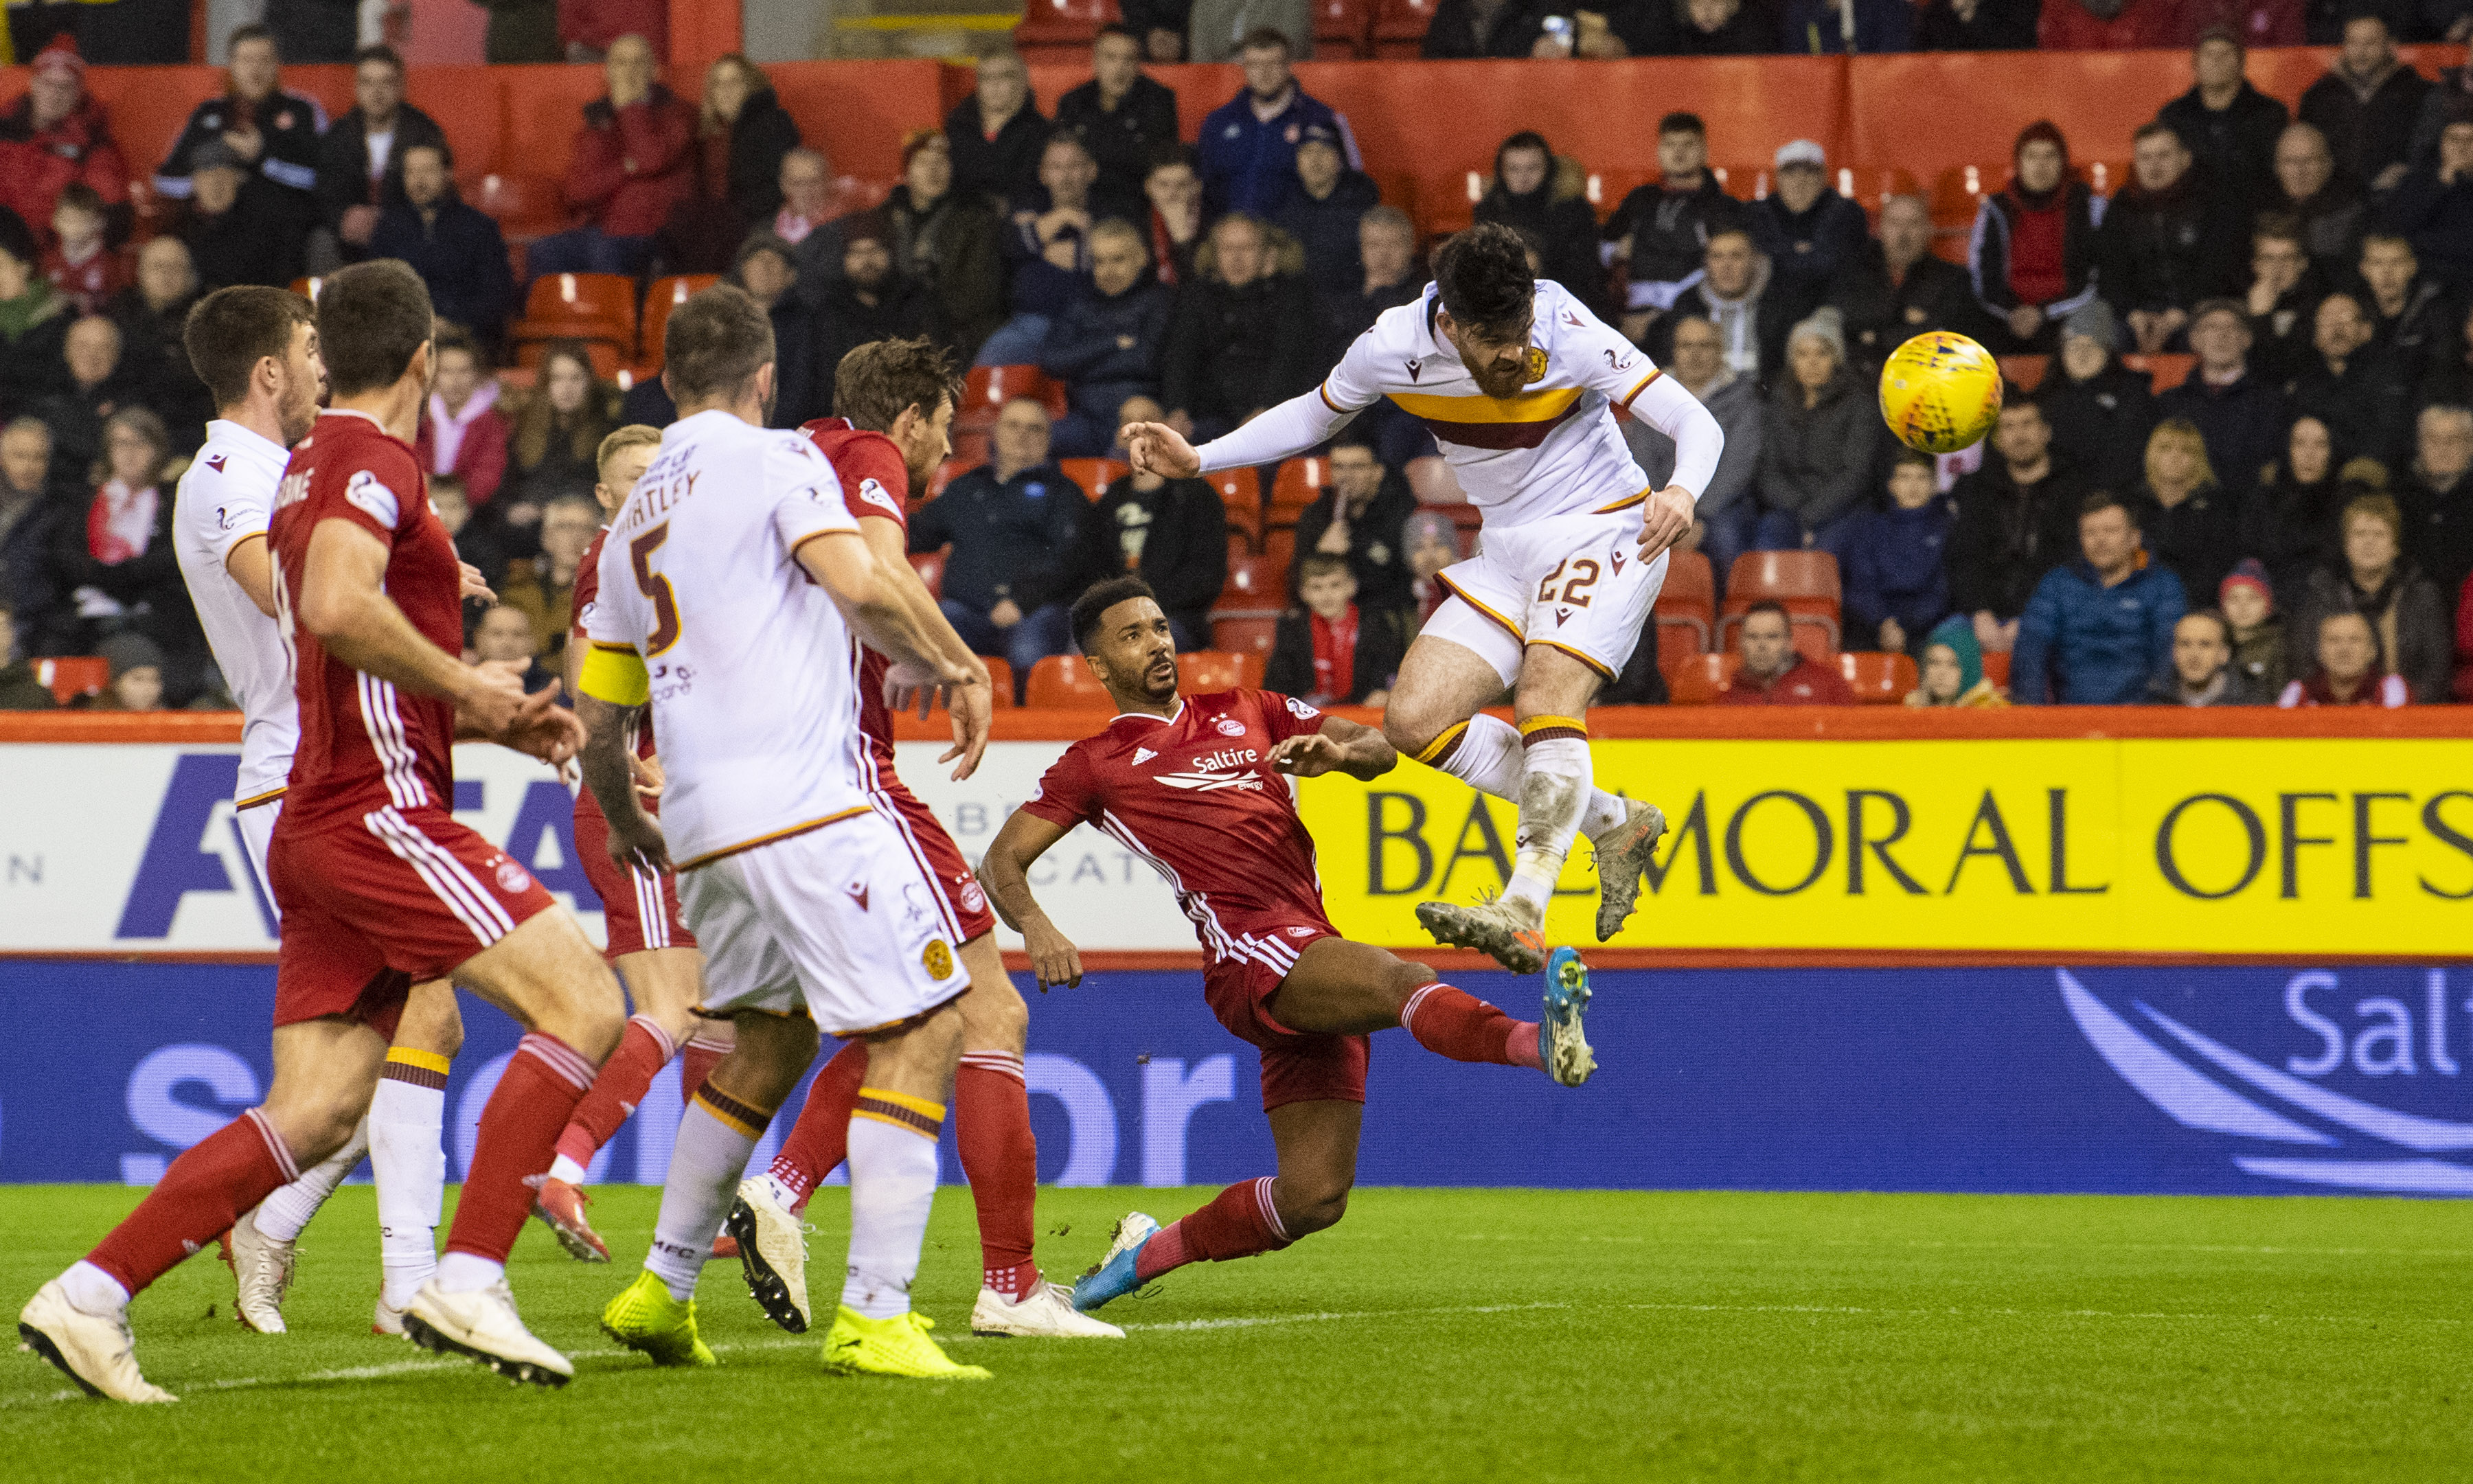 Motherwell's Liam Donnelly put his side ahead at Pittodrie